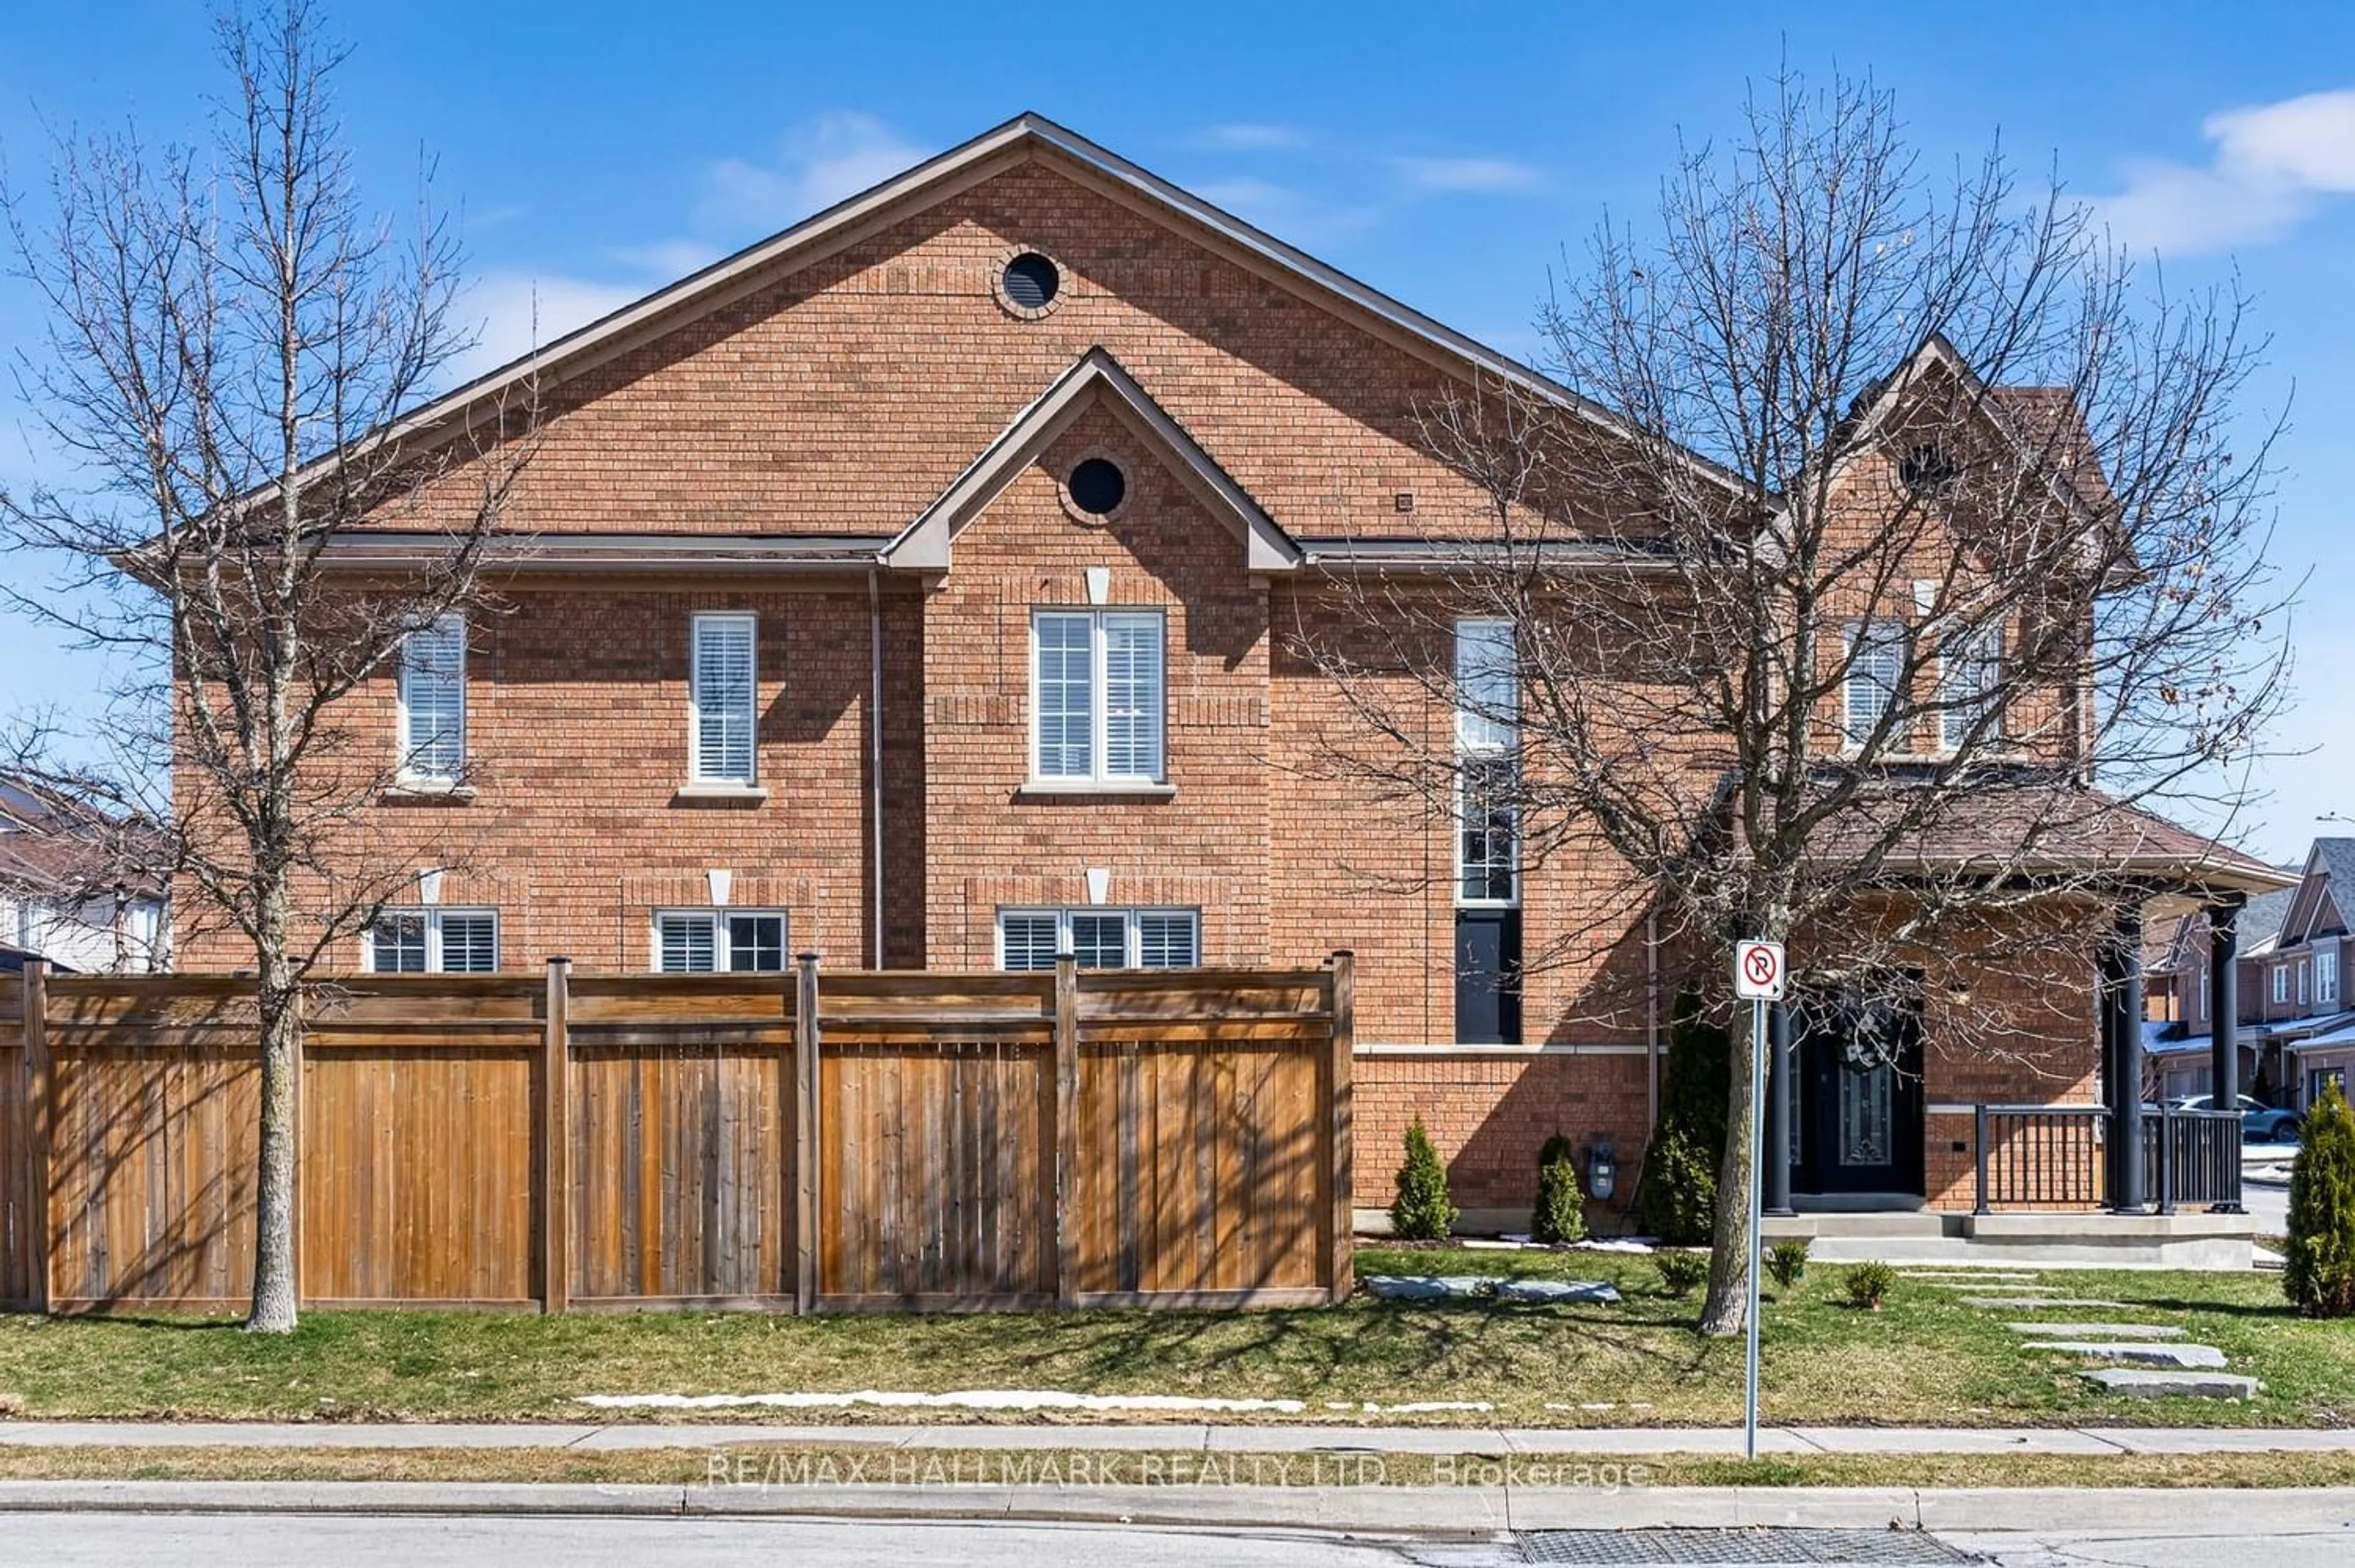 Home with brick exterior material for 2 Village Vista Way, Vaughan Ontario L6A 3S3